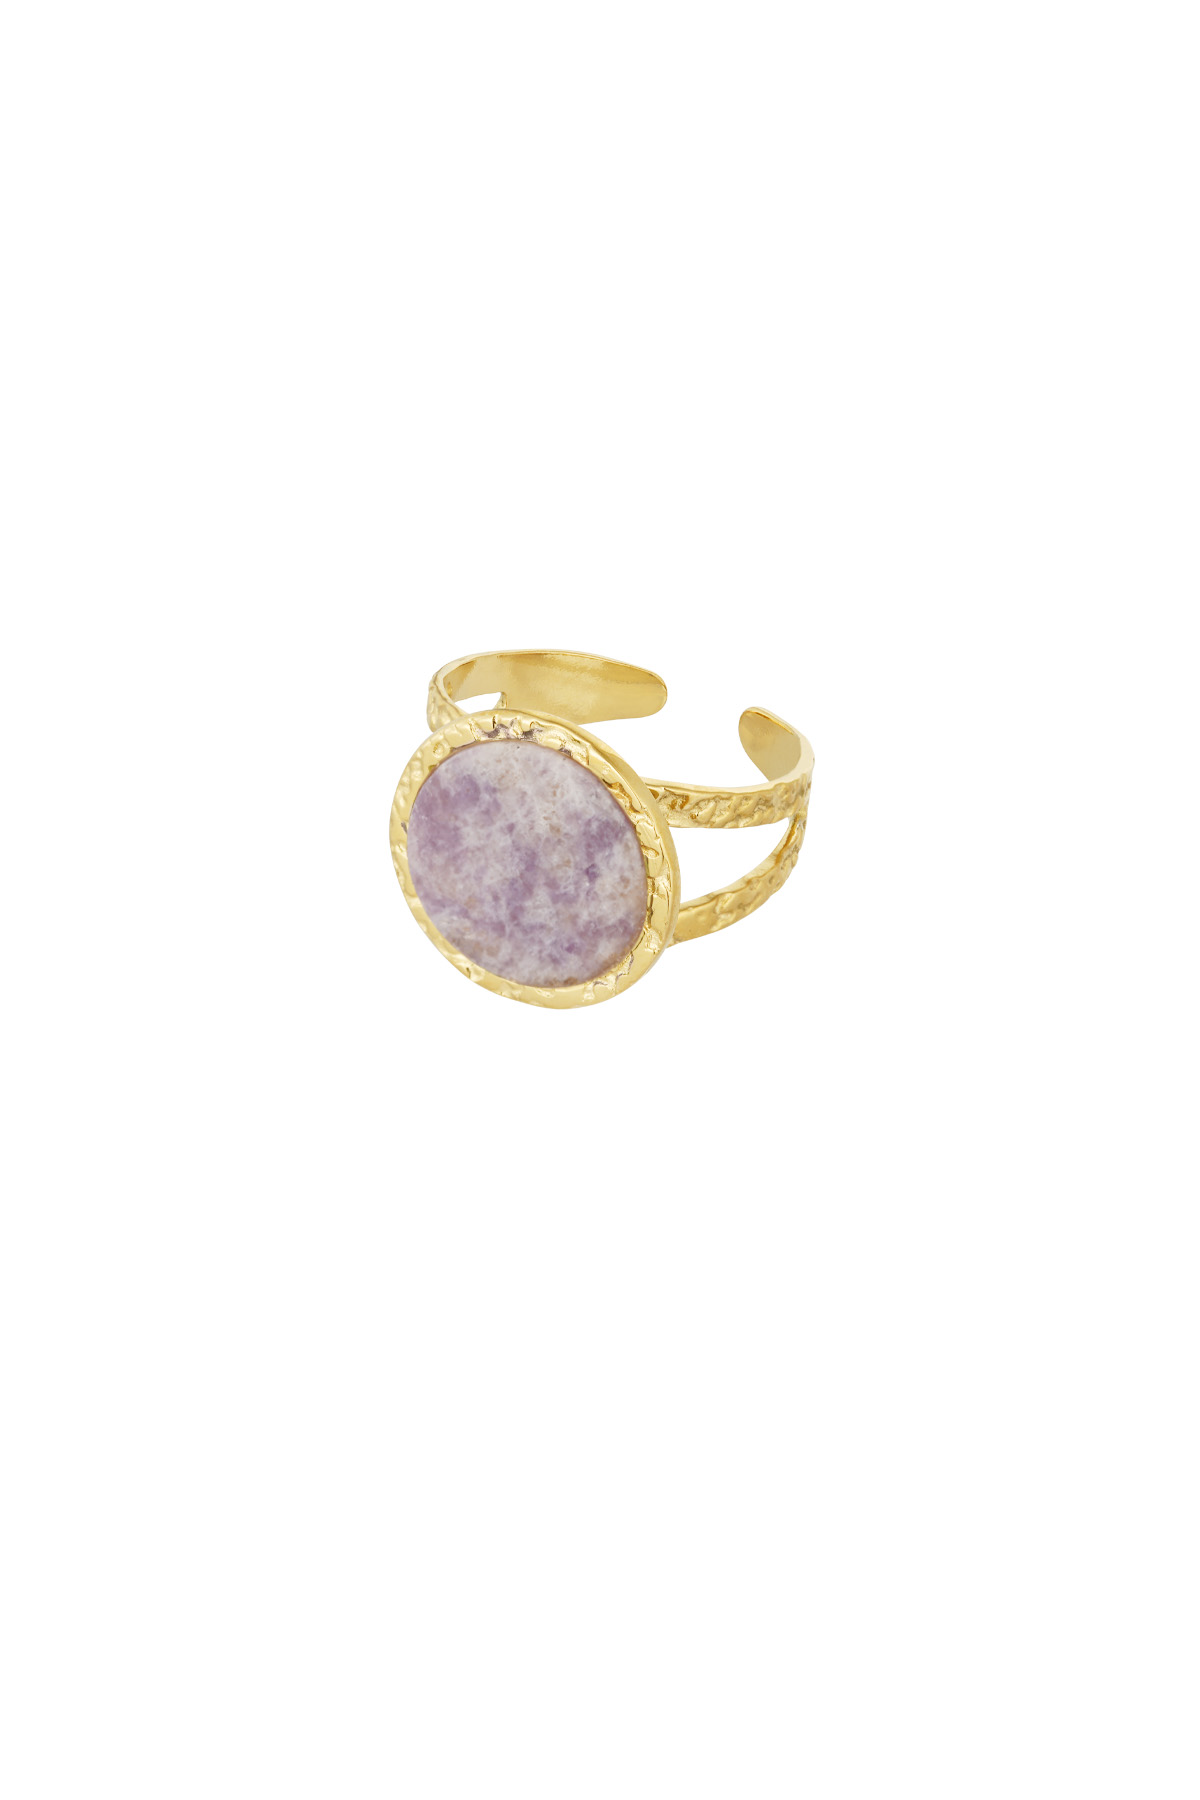 Ring with round stone - purple